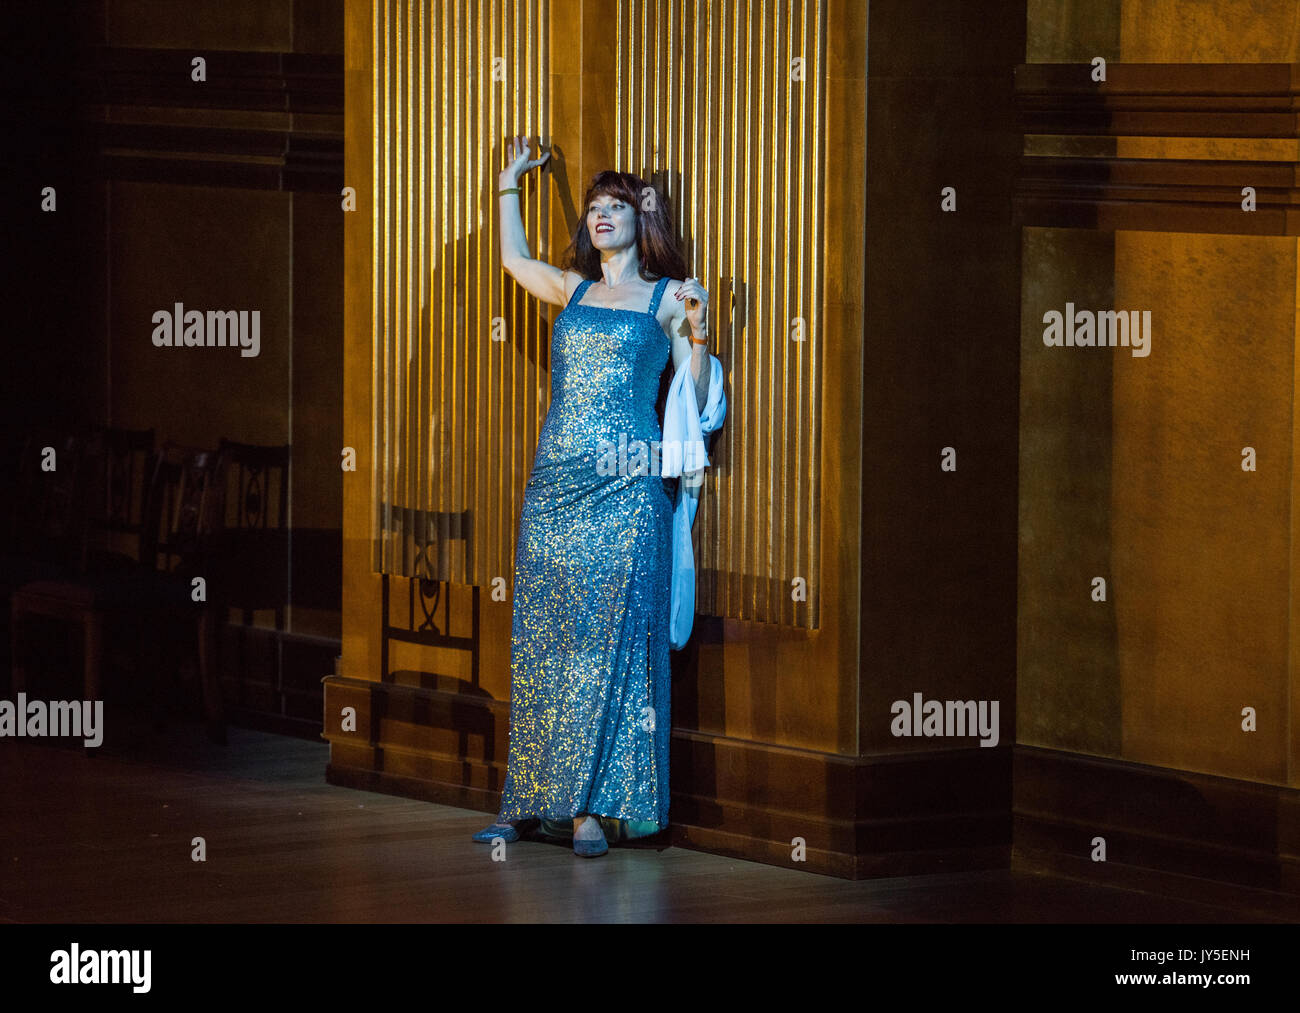 ATTENTION: EMBARGOED FOR PUBLICATION UNTIL 18 AUGUST 20:00 GMT! ACHTUNG: SPERRFRIST 18.08.2017 20 UHR - Canadian soprano and director Barbara Hannigan as Mélisande rehearsing during the general rehearsal of the Claude Debussy opera Pelléas et Mélisande at the Jahrhunderthalle in Bochum, Germany, 15 August 2017. More than 41 theater, music, dance and art productions, among them several premieres, are taking place amidst former coal-fired power stations, stockpiles and steelworks between Dortmund and Dinslaken as part of the Ruhrtriennale 2017 - running until 30 September. (ATTENTION EDITORS: Stock Photo